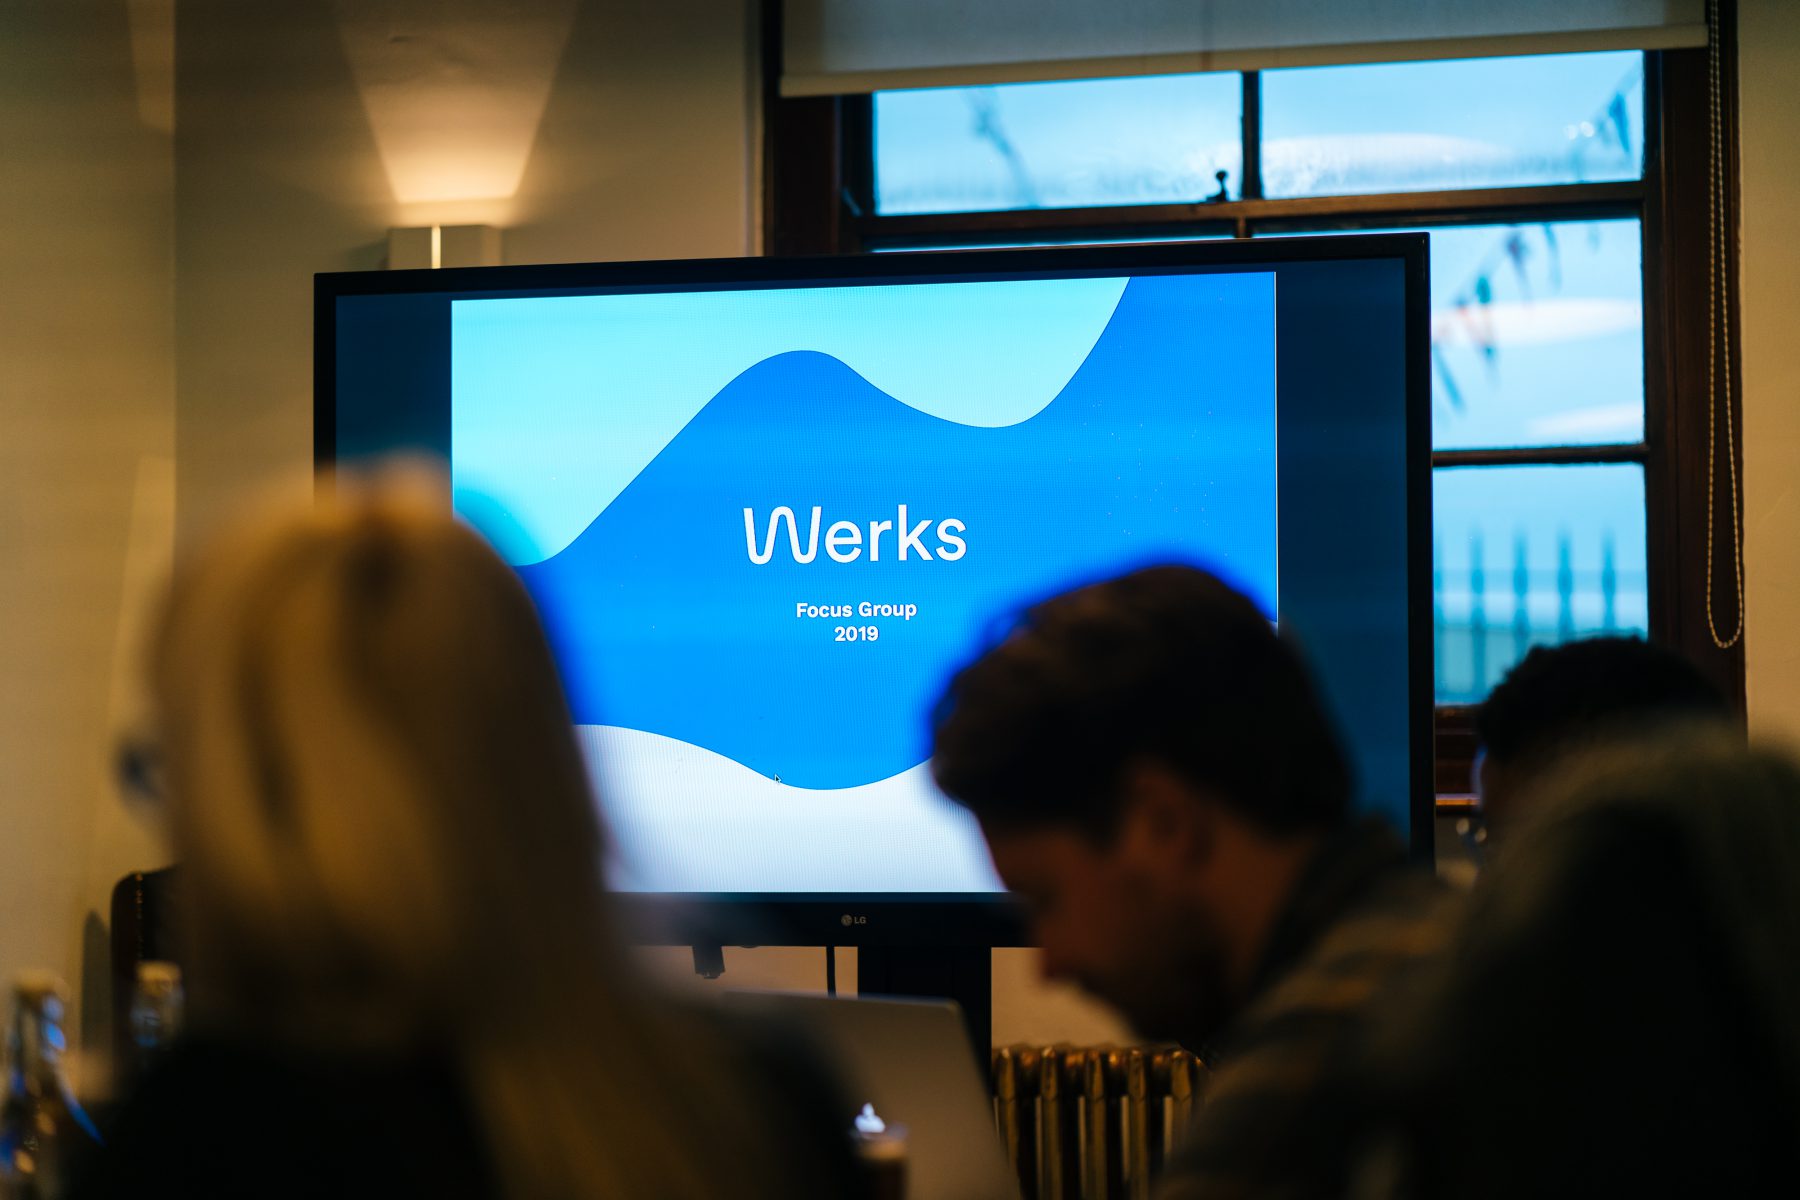 This Werks: revolutionising job search in Leeds